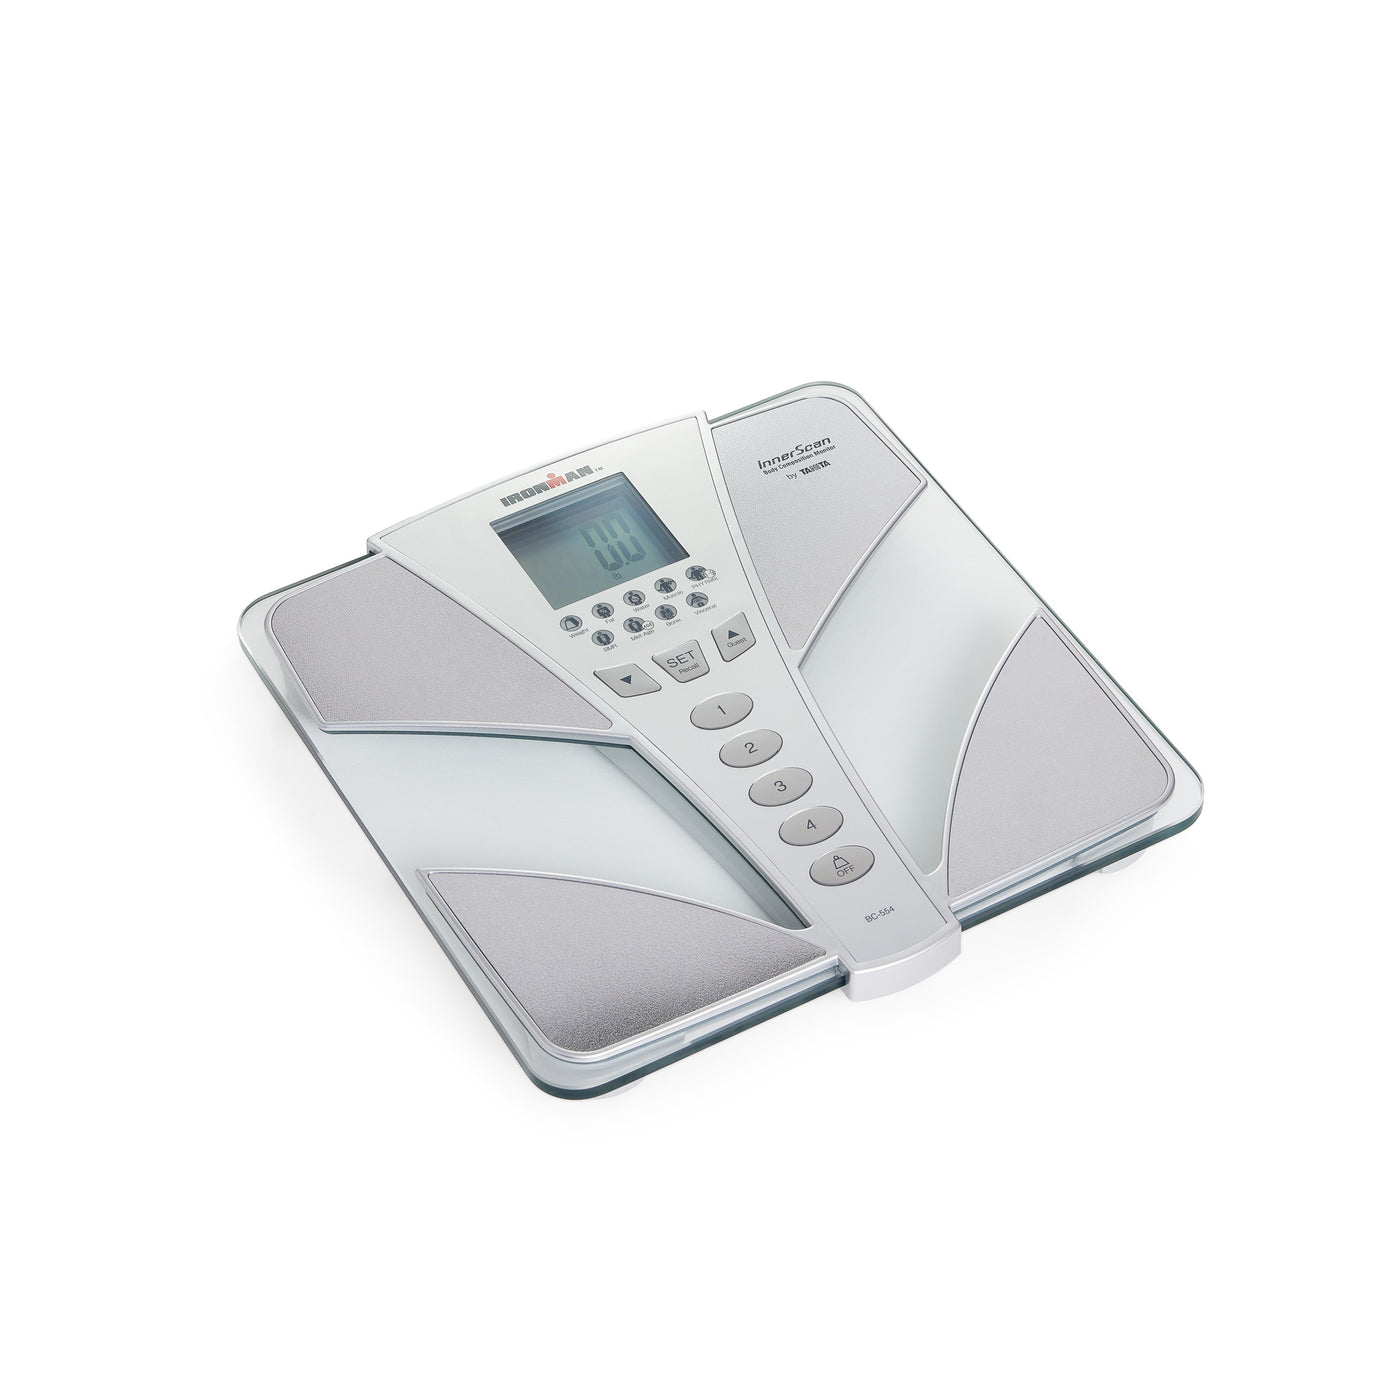 BC-554 IRONMAN Multi-Frequency Body Composition Monitor